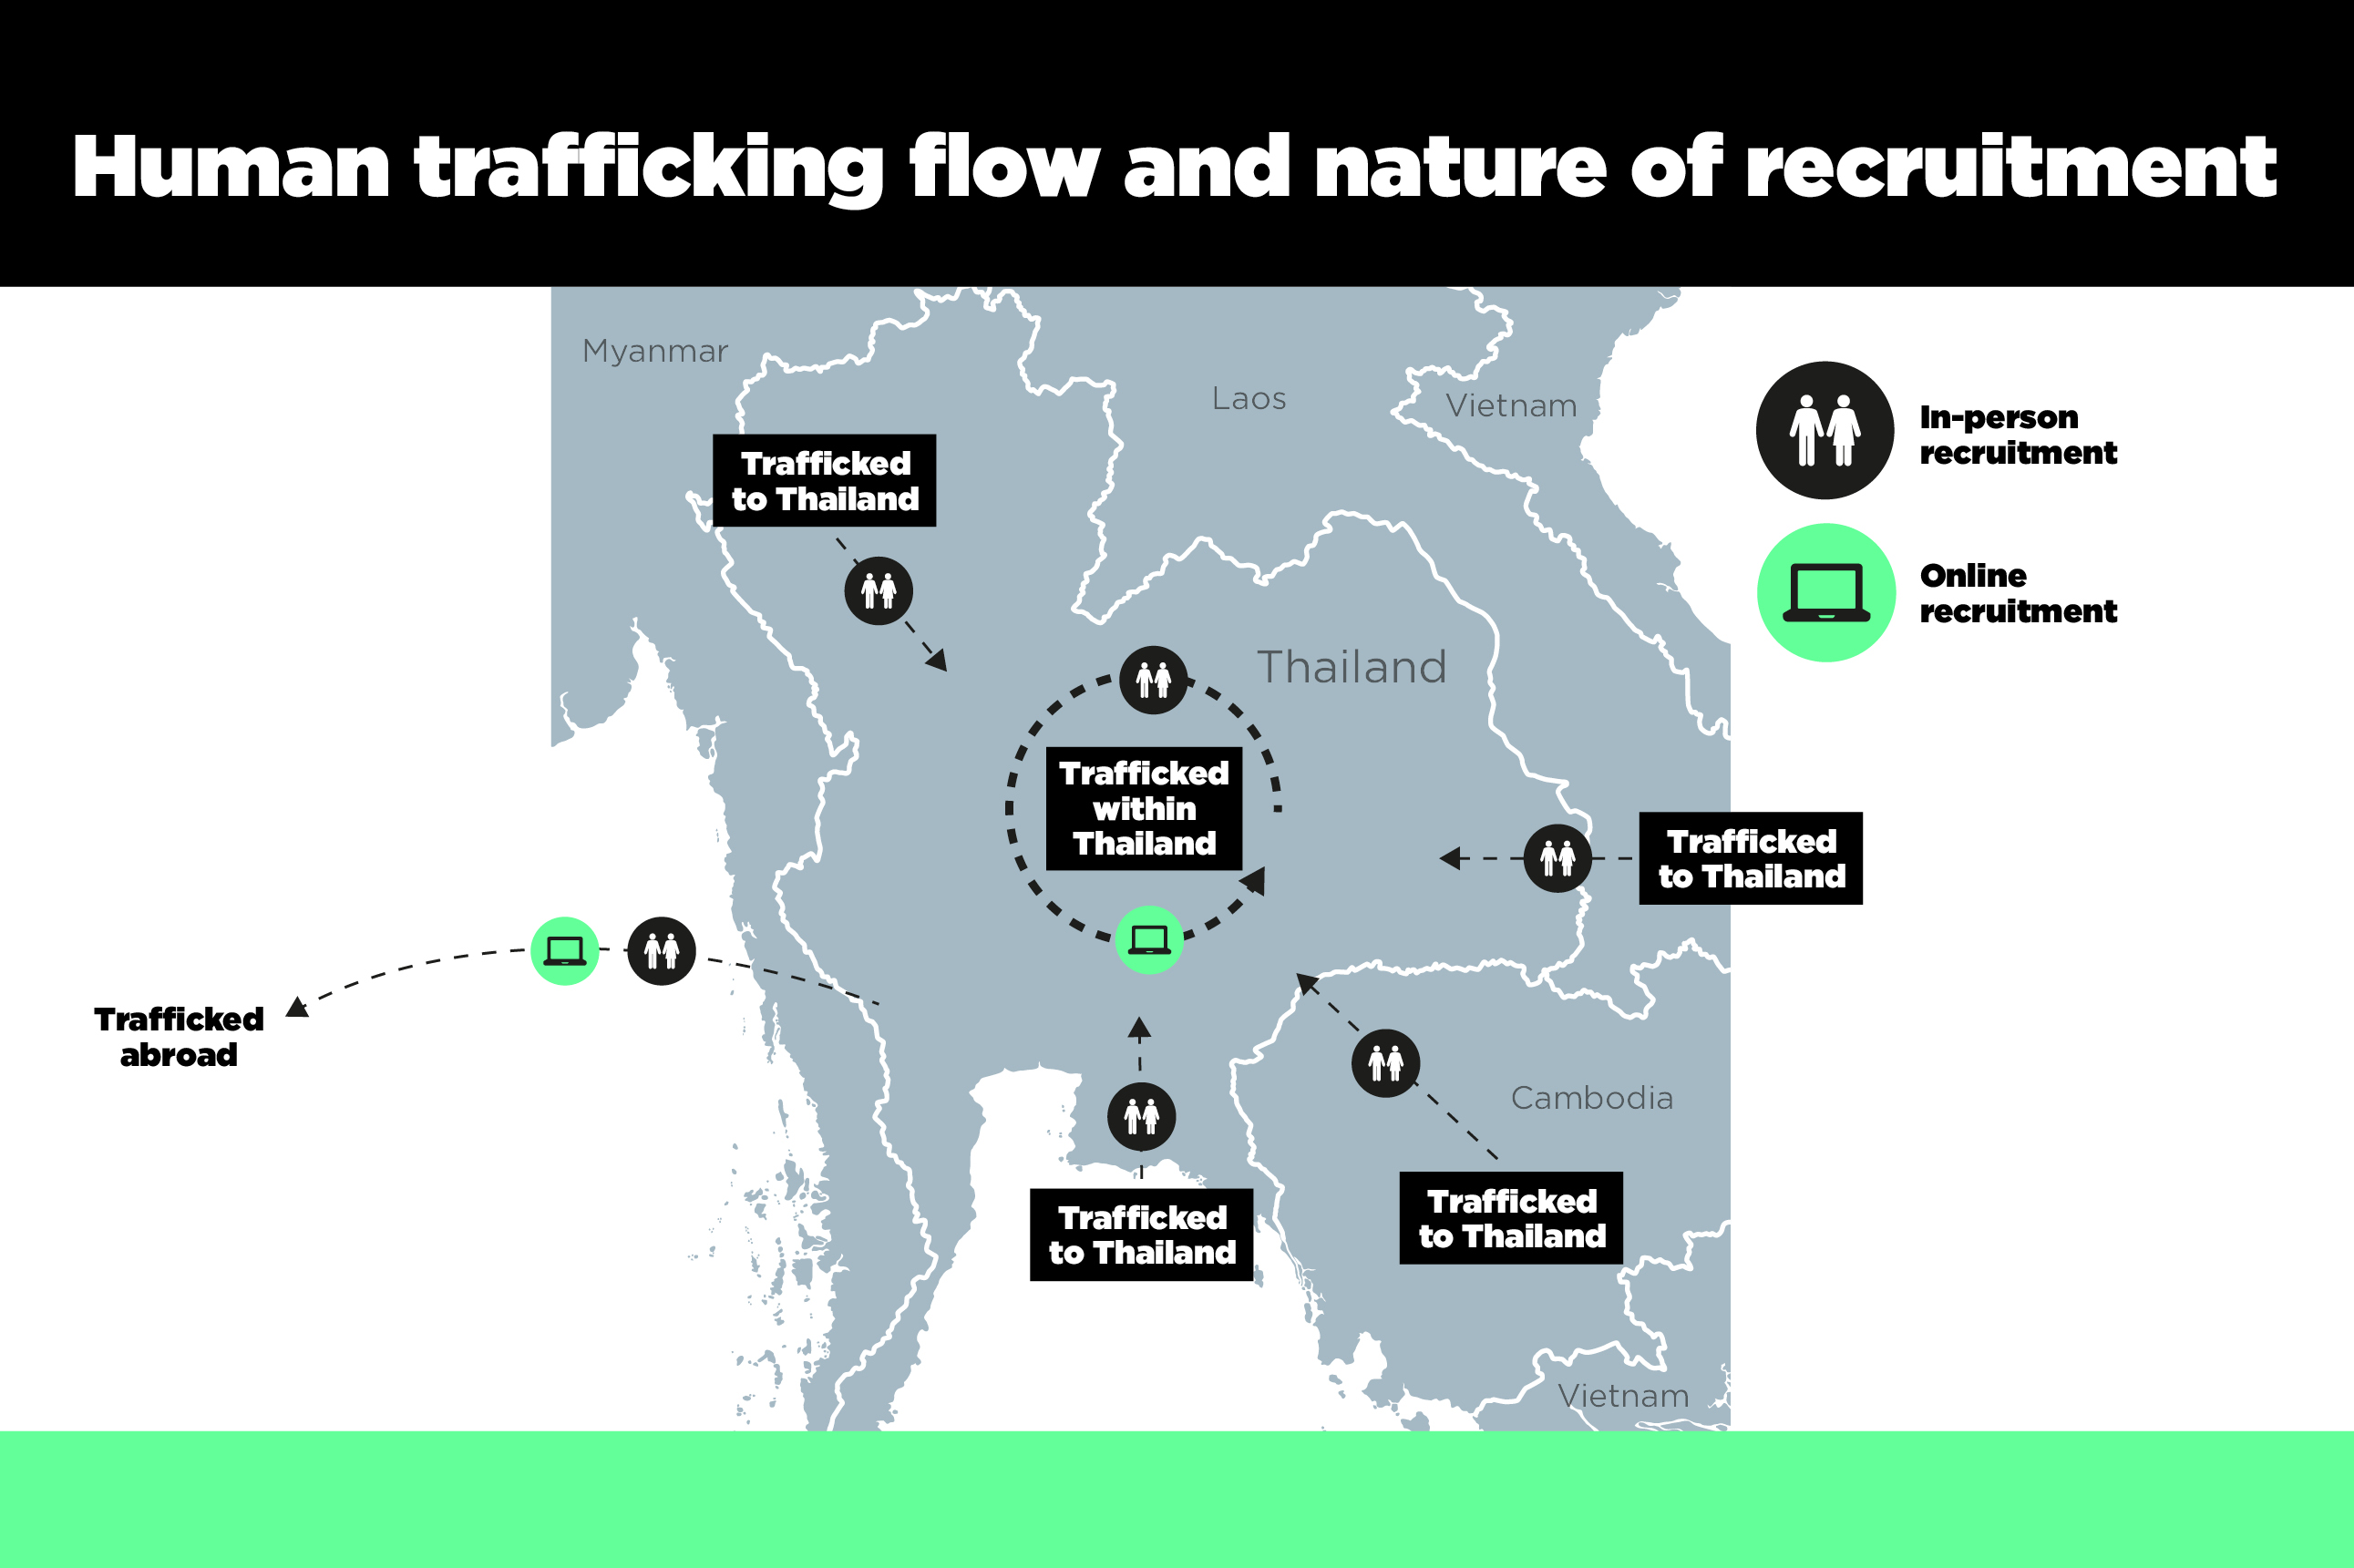 Map showing the potential flow of human trafficking and the nature of recruitment across Southeast Asia. In-person trafficking potential exists within Thailand but also from neighbouring Myanmar, Laos and Cambodia. Online recruitment potential exists from overseas.